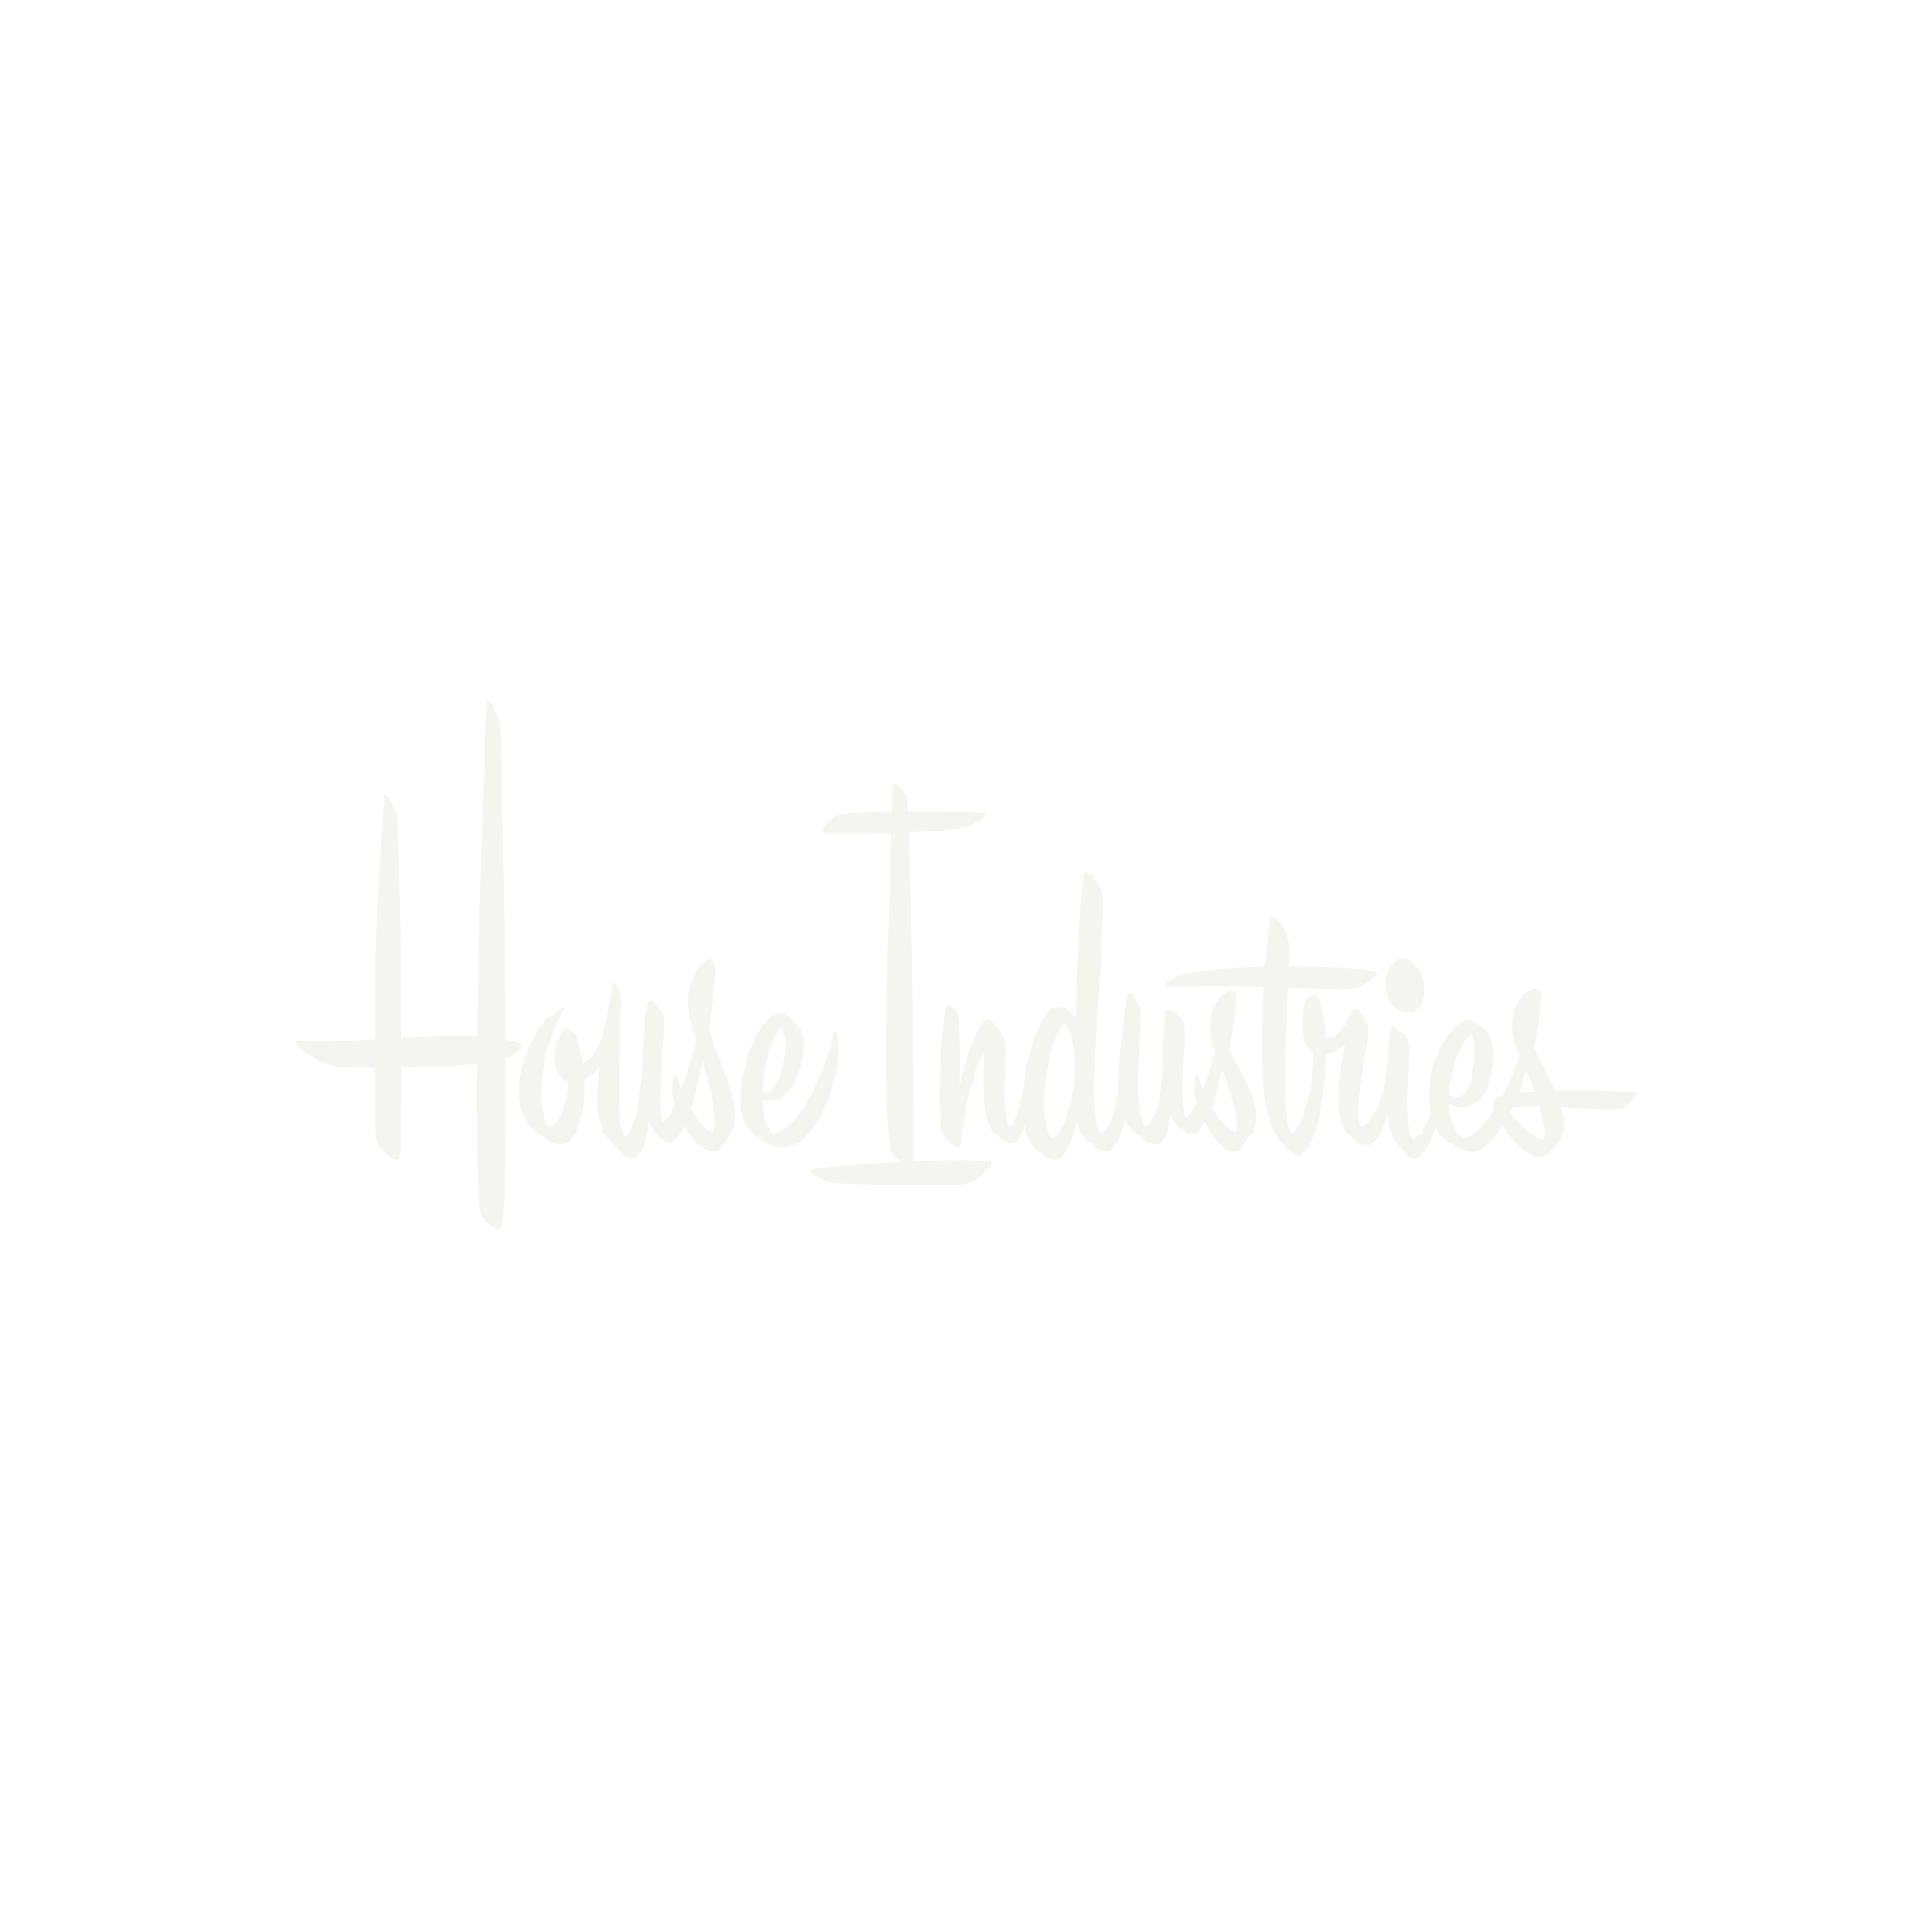 House Industries@2x.png